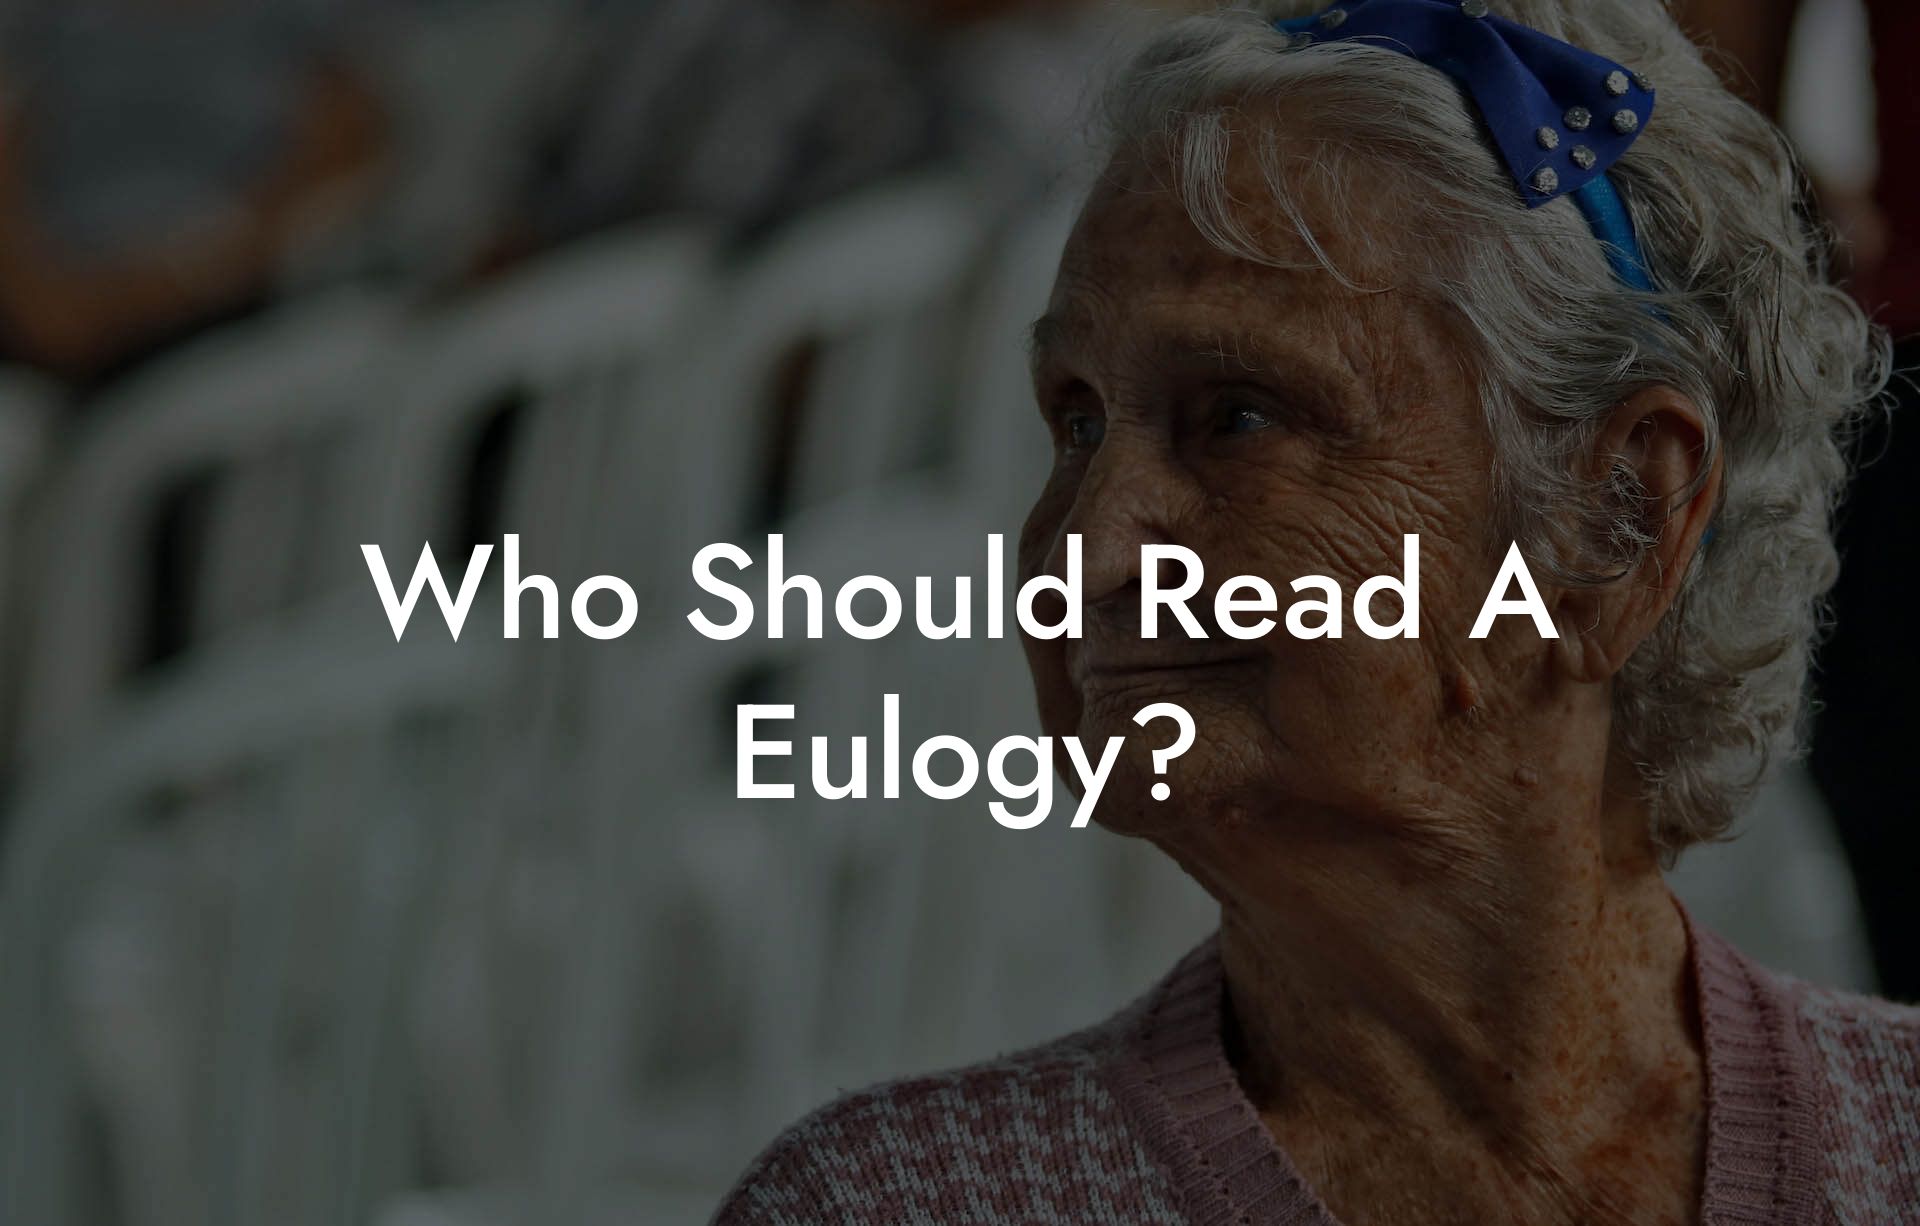 Who Should Read A Eulogy?